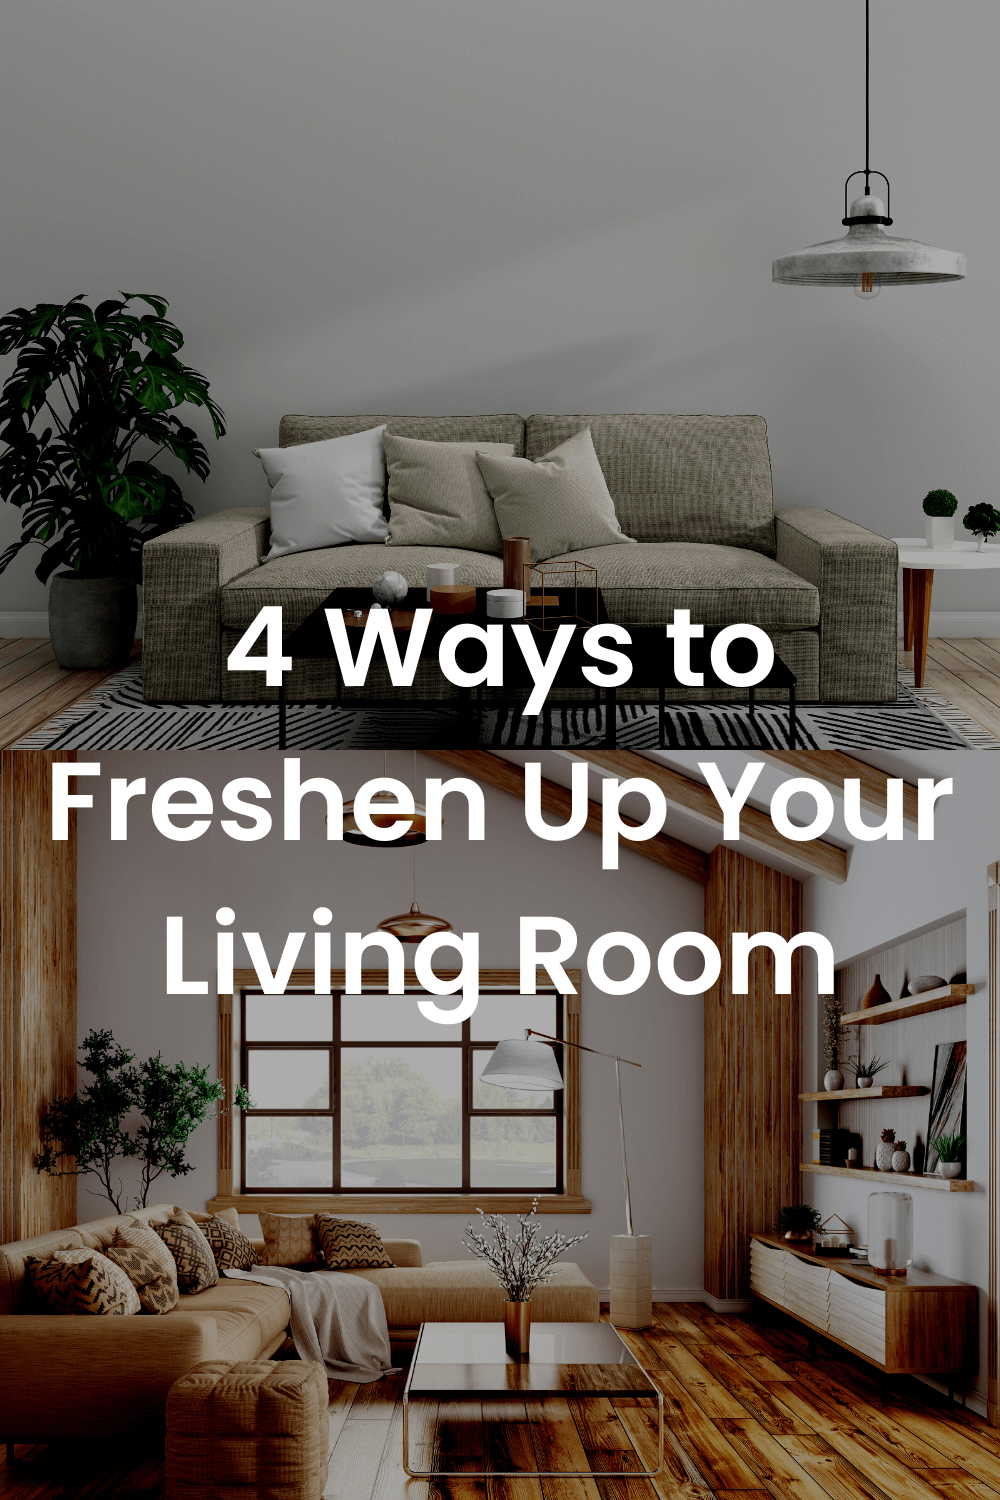 Four Ways to Freshen Up Your Living Room